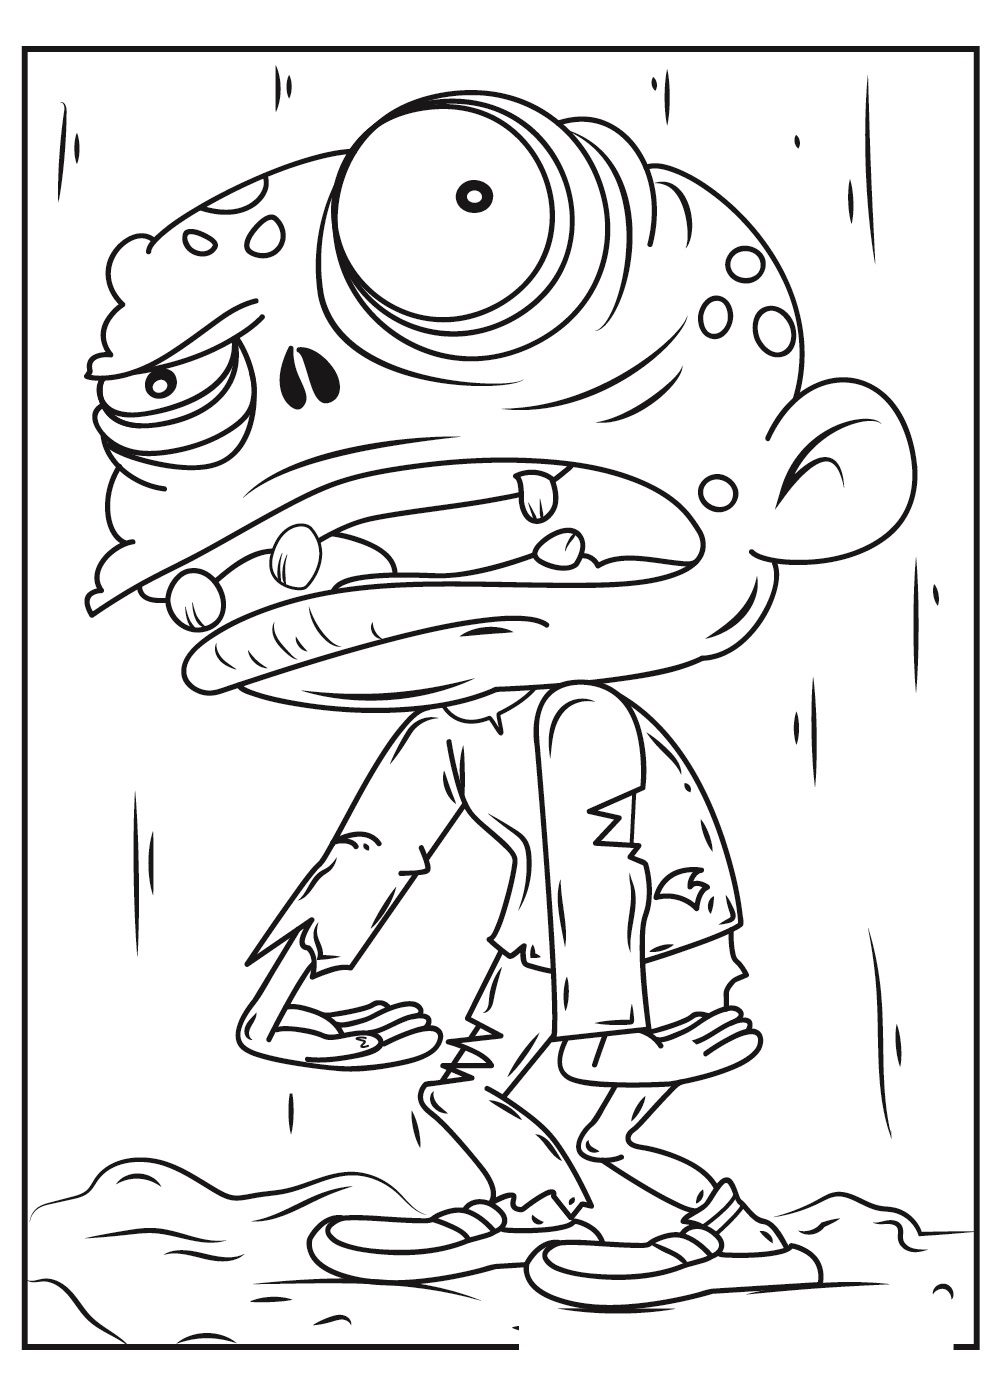 zombie-halloween-coloring-pages-book-for-kids